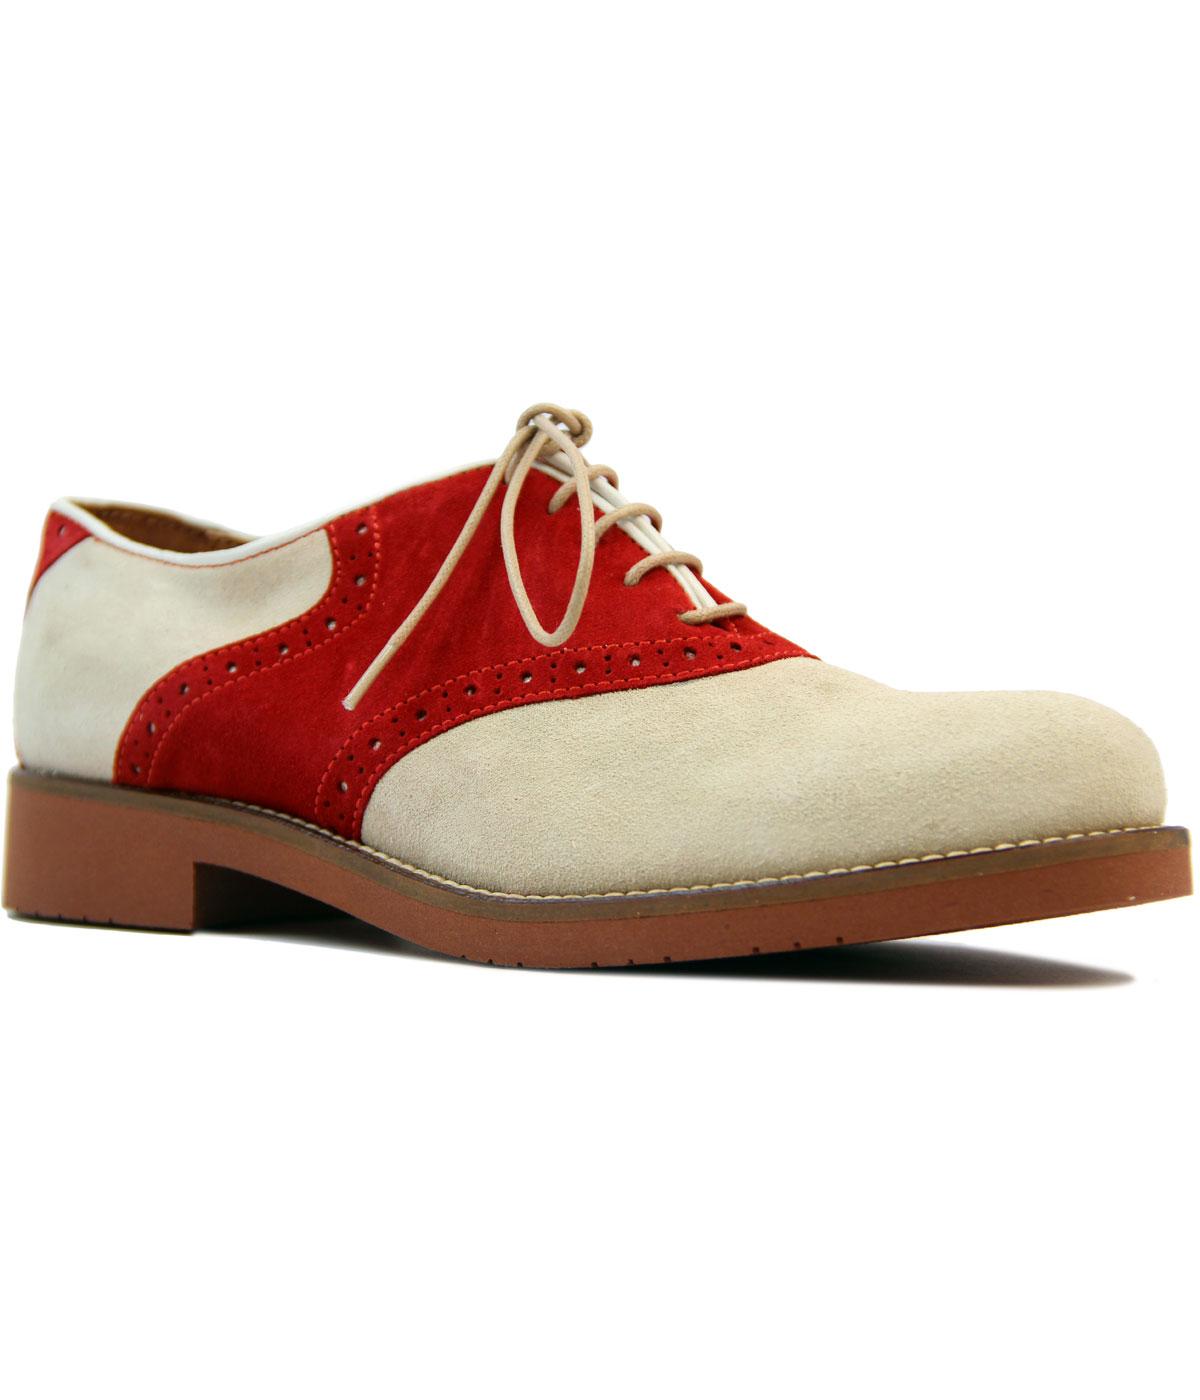 red saddle shoes